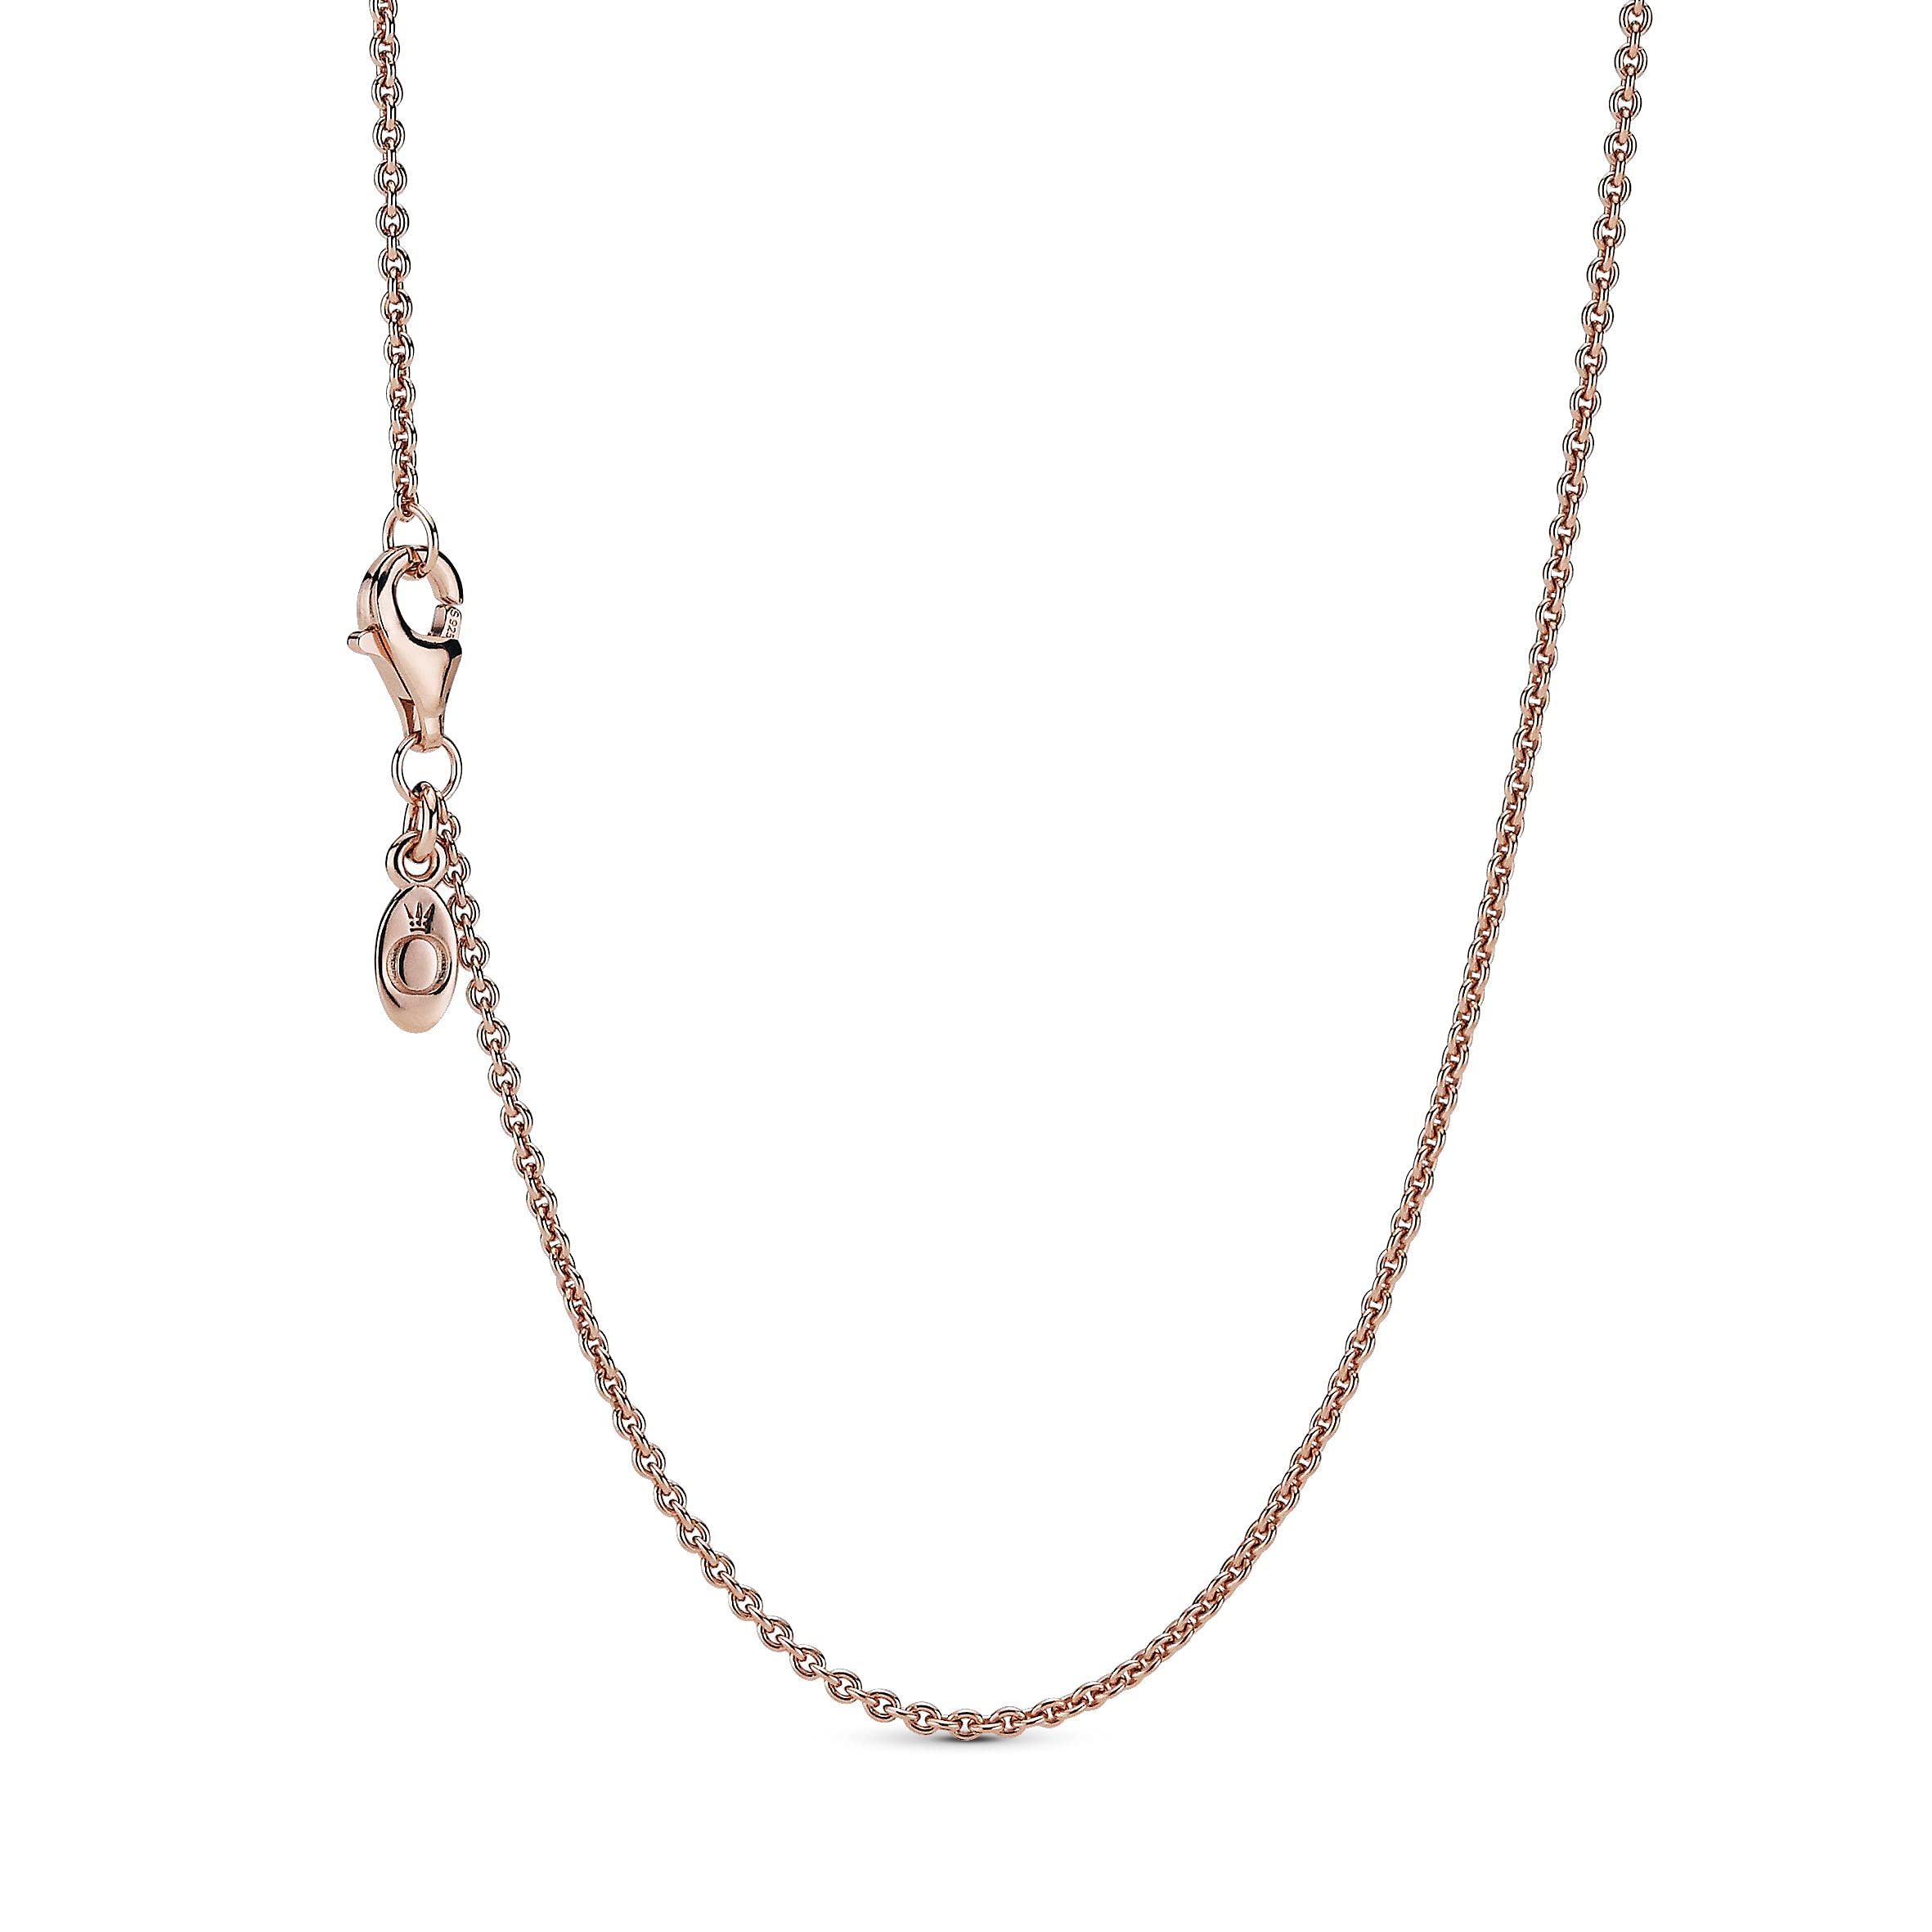 PANDORA Jewelry - Classic Cable Chain Necklace - Gift for Her